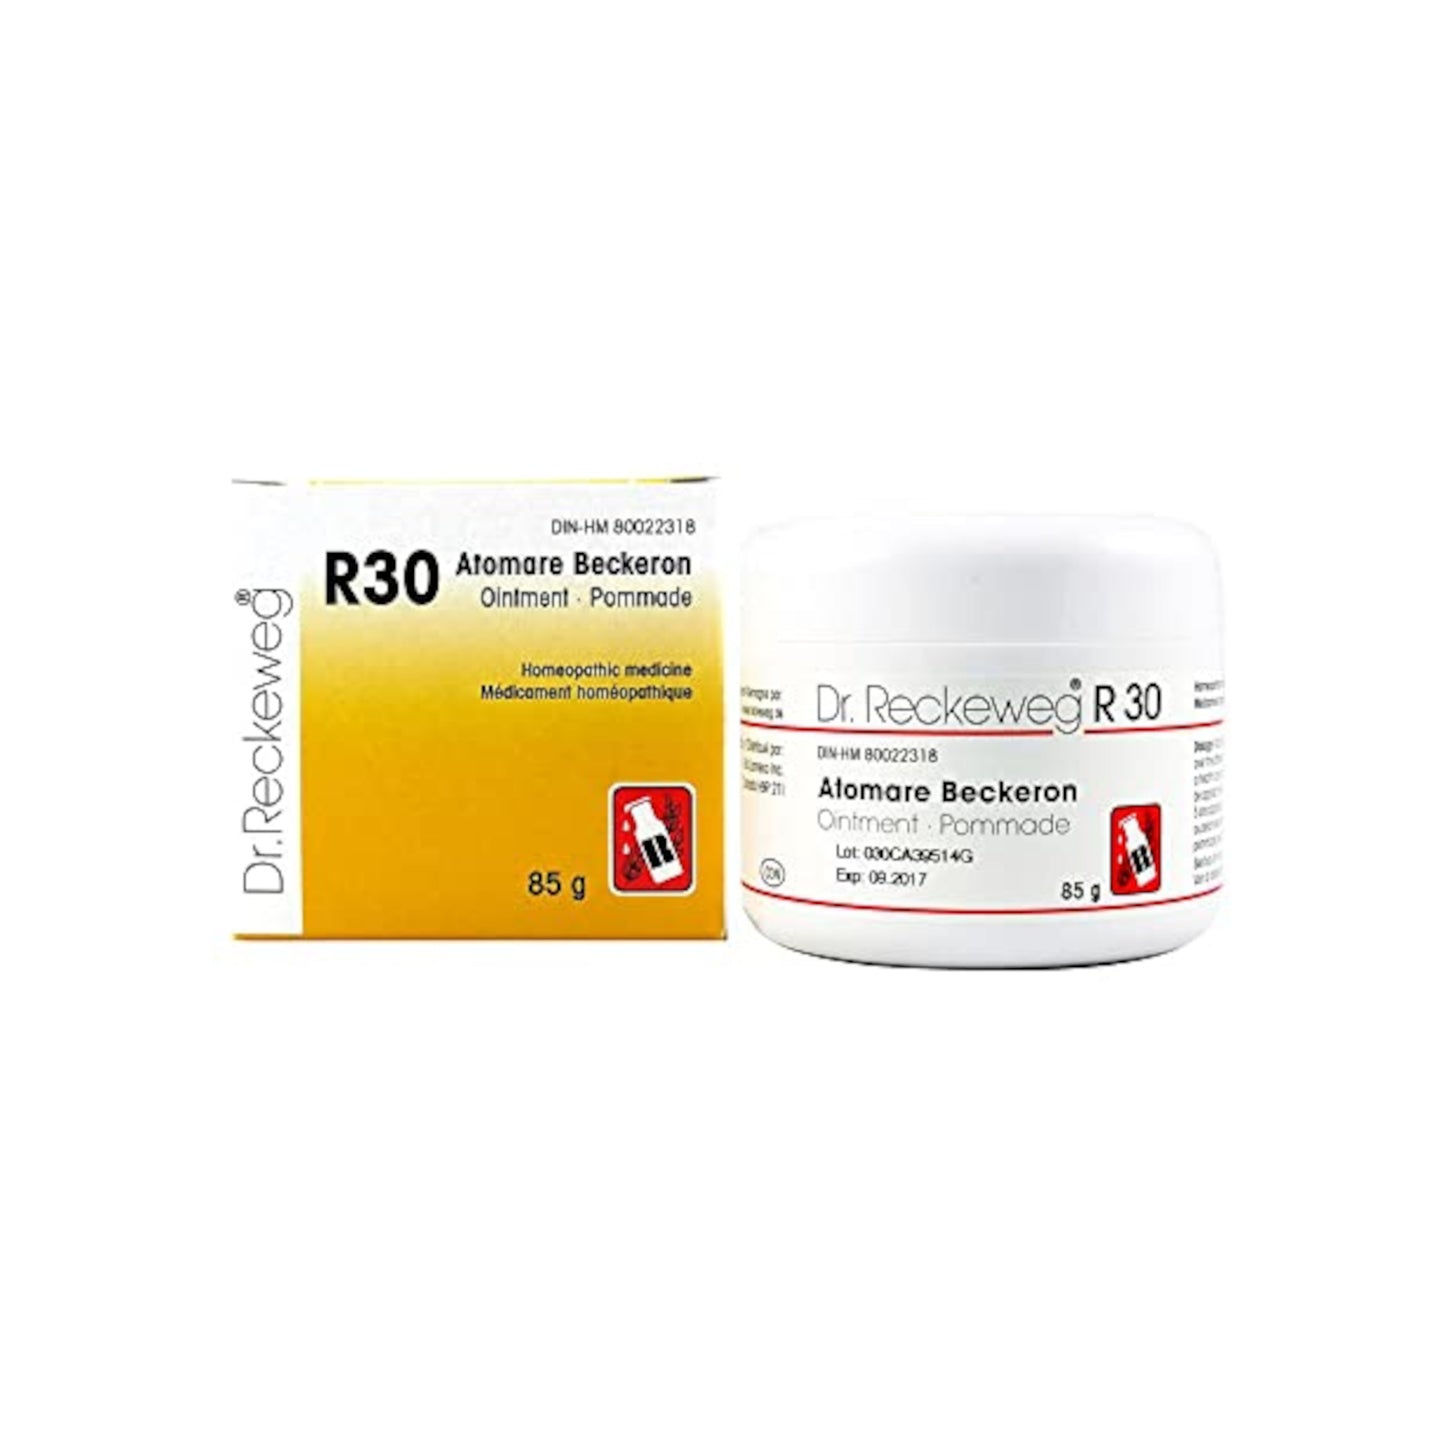 Image for DR. RECKEWEG R30 - Universal Ointment for Pain Relief 85 g.